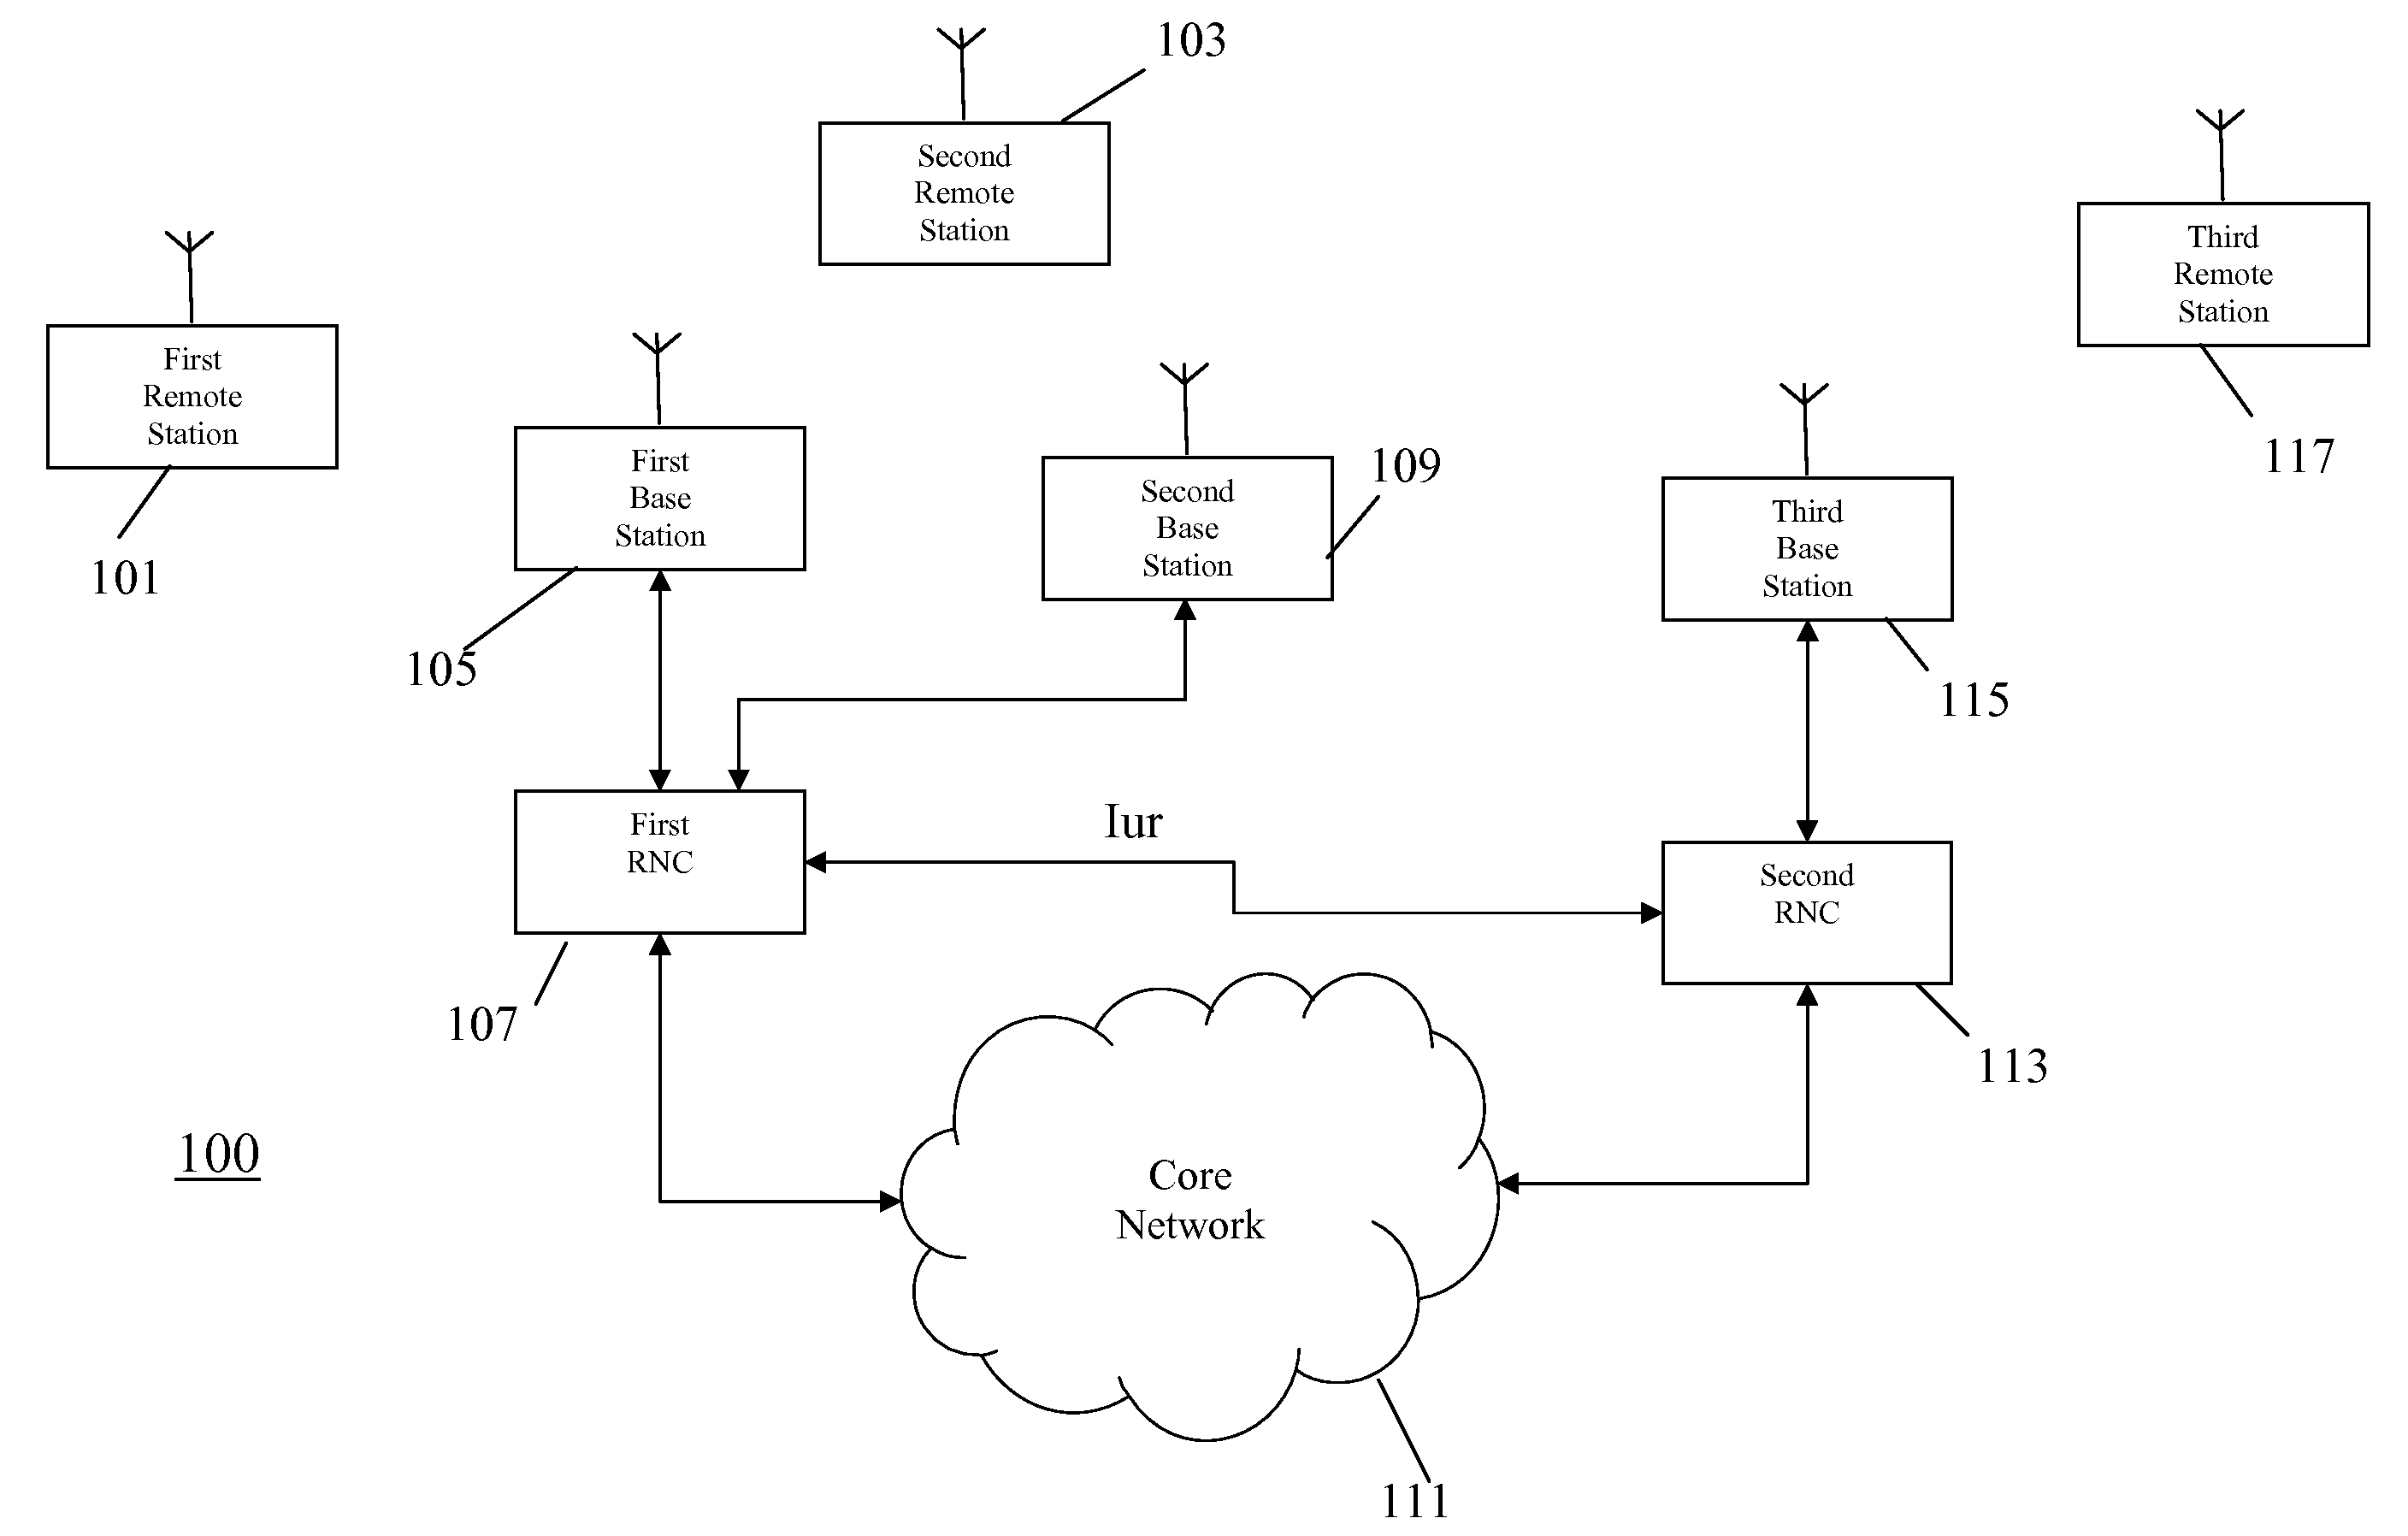 High speed download packet access communication in a cellular communication system